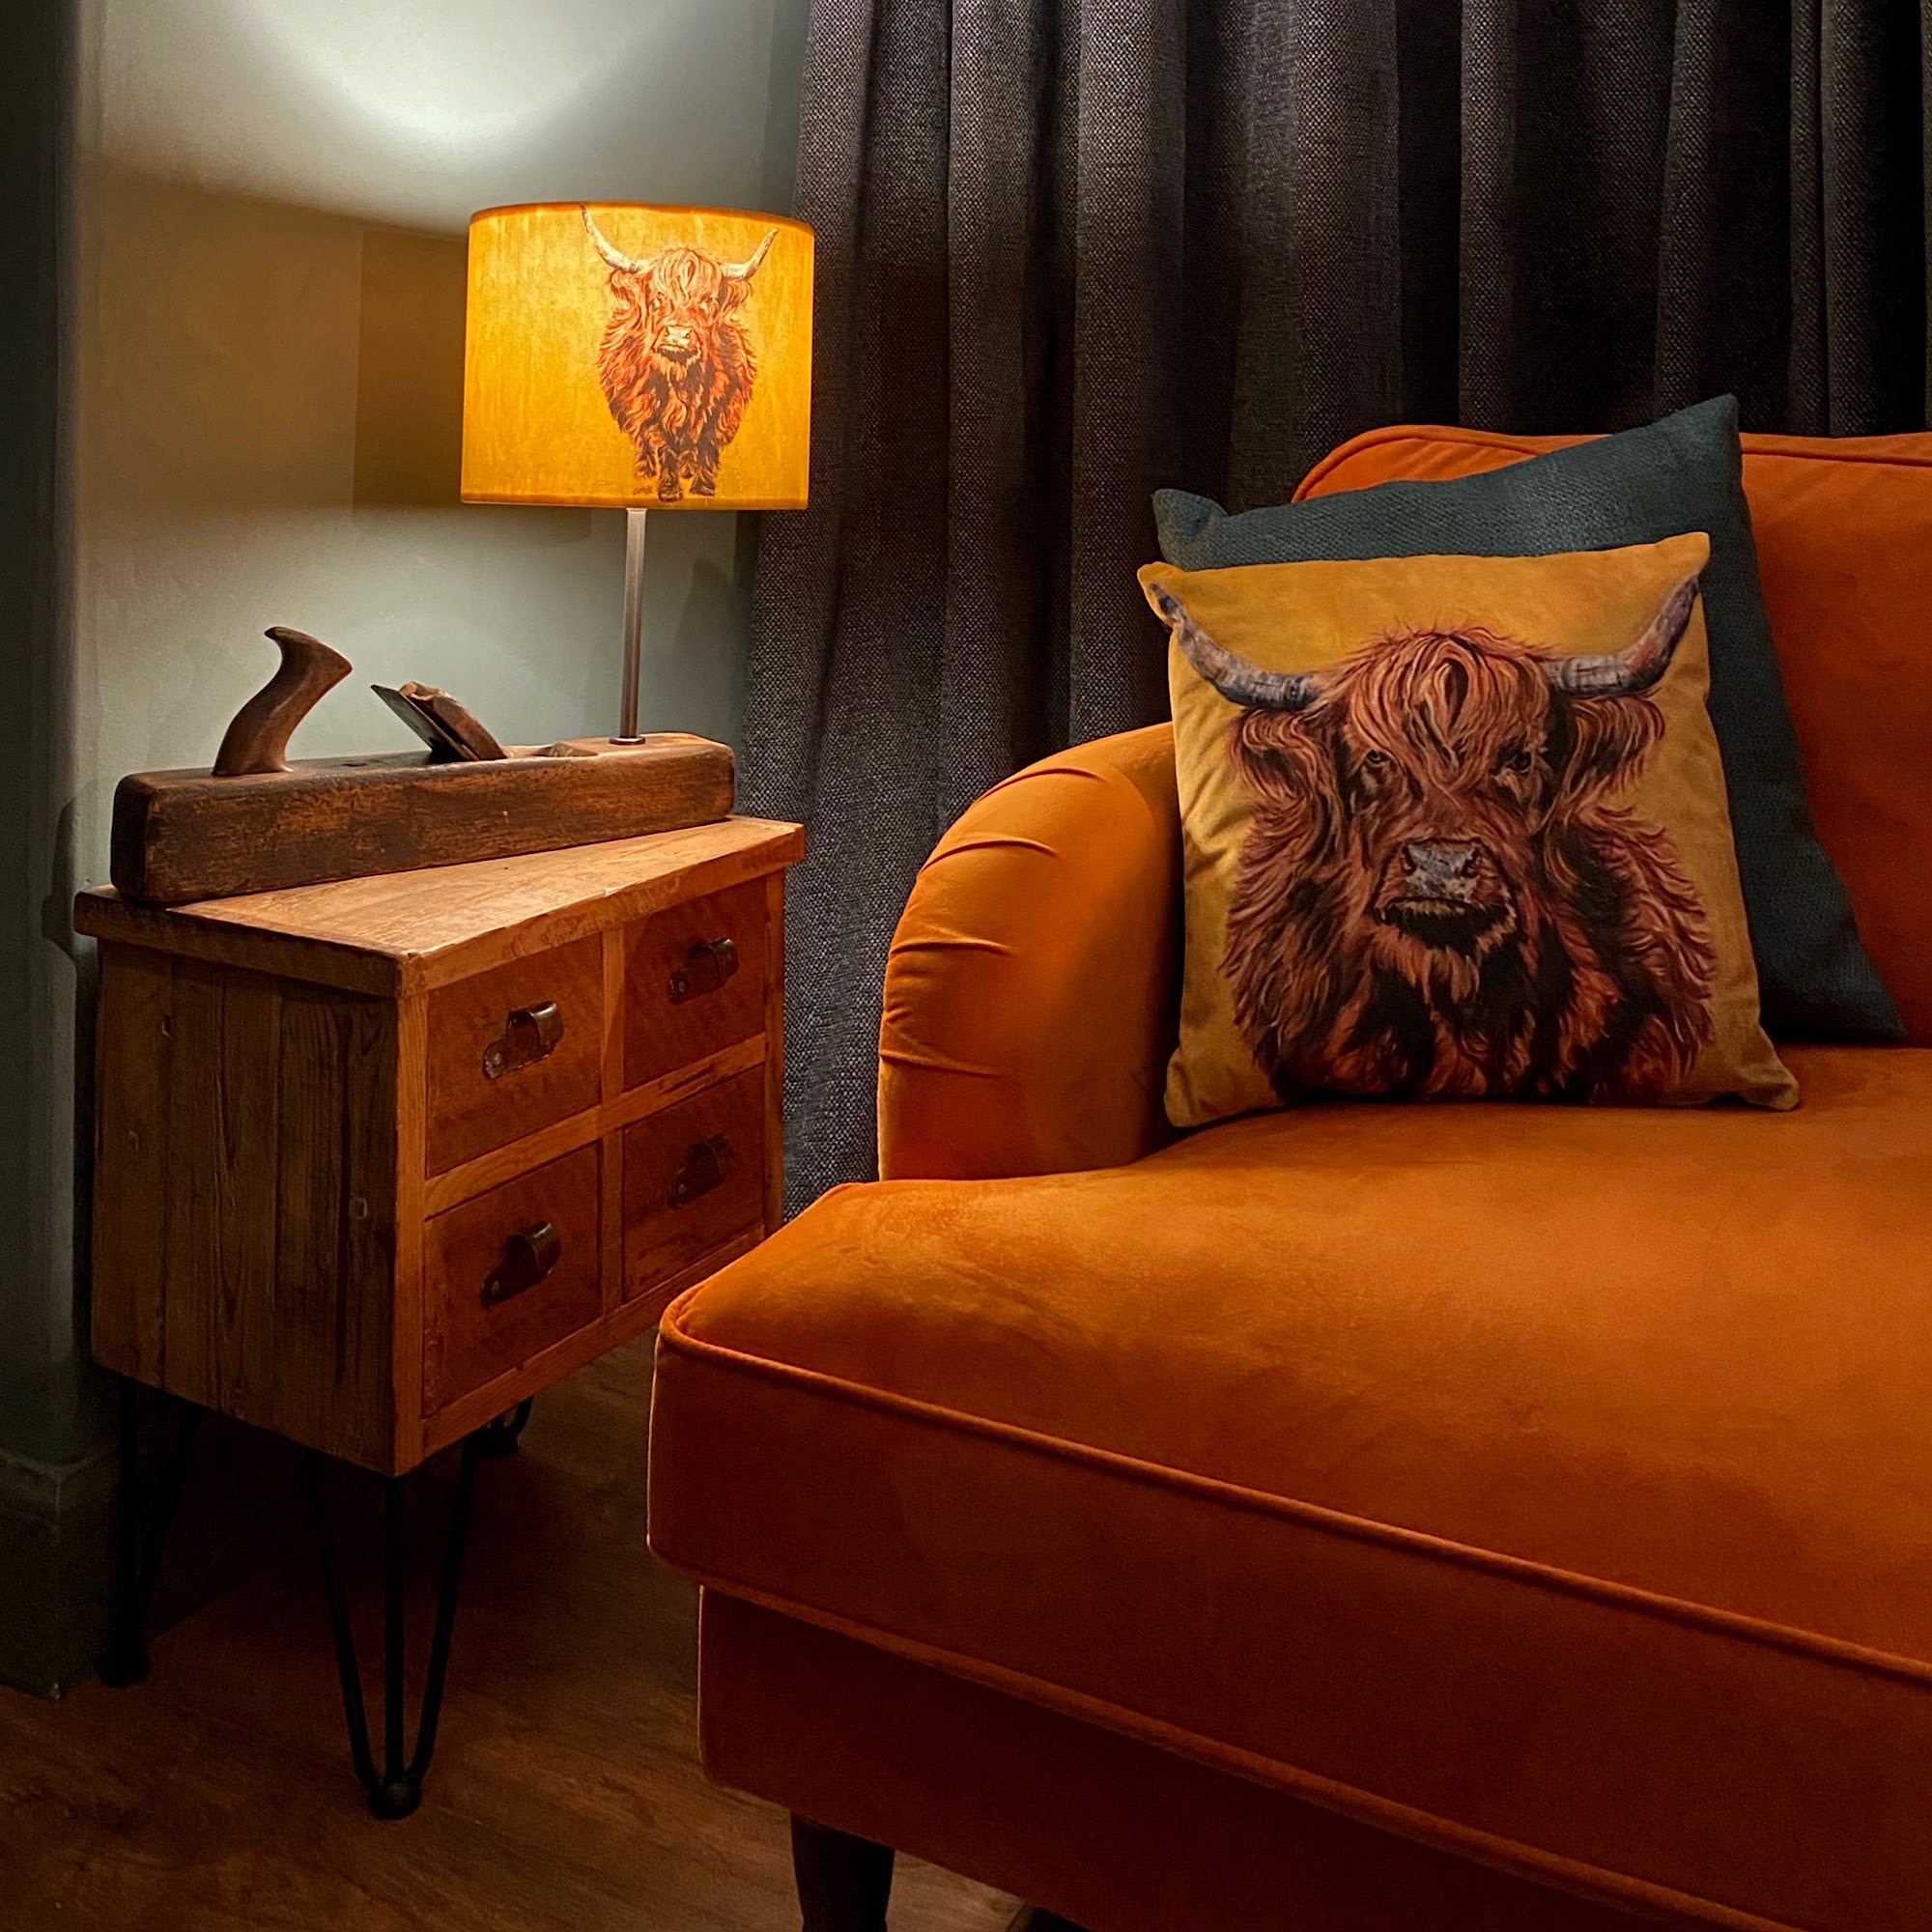 Lounge setting with soft velvet printed cushion and matching printed lampshade . Both printed with aHighland cow, mustard yellow background with rusty brown cow.